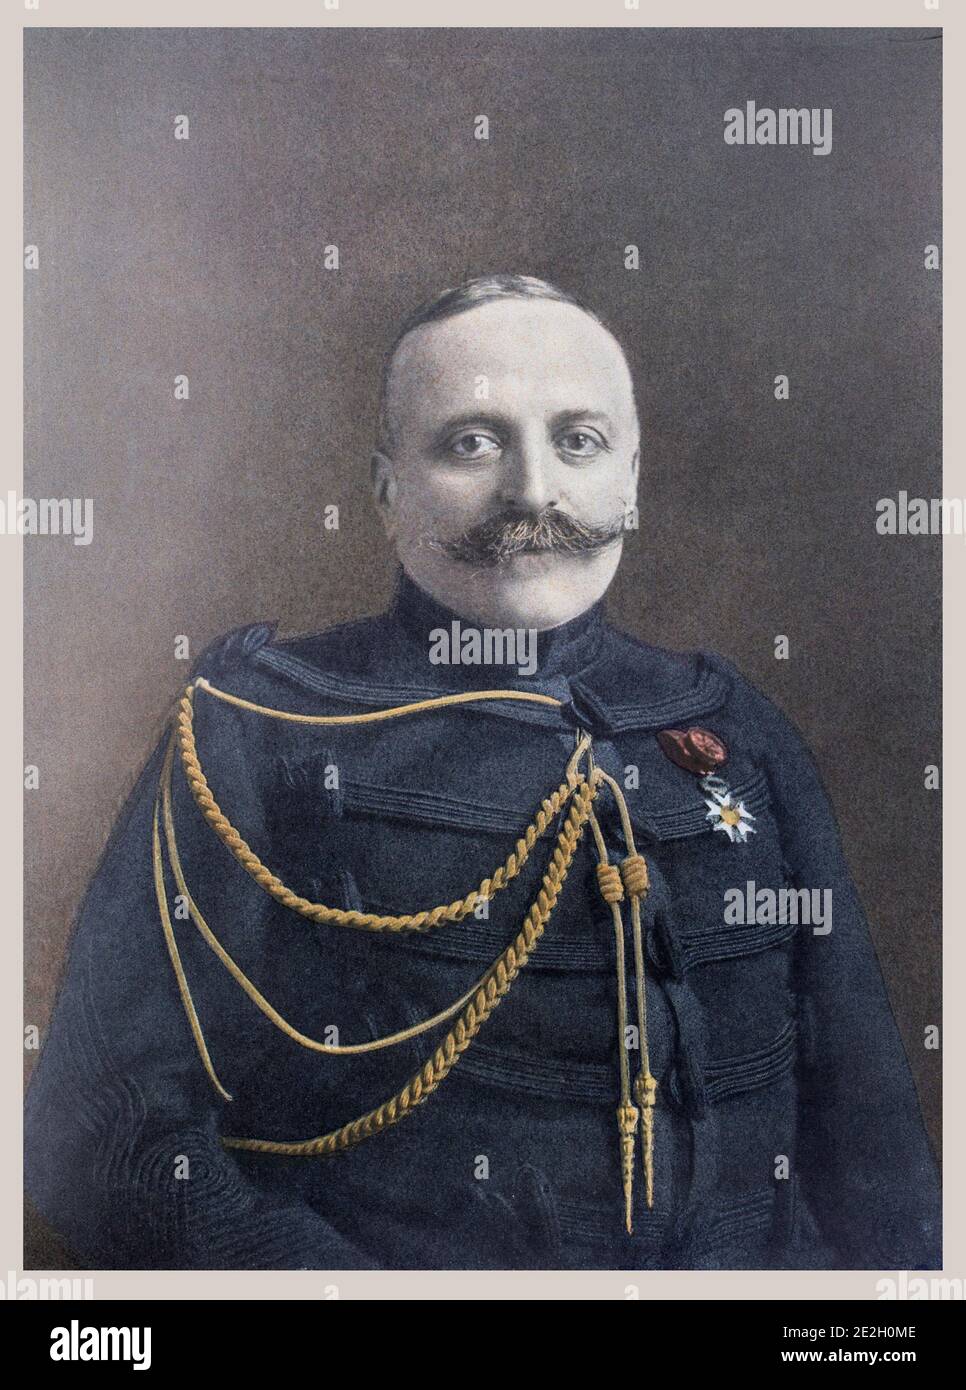 Marie Louis Adolphe Guillaumat (1863 – 1940) was a French Army general during World War I. At the start of World War I, he was chief of Minister of Wa Stock Photo